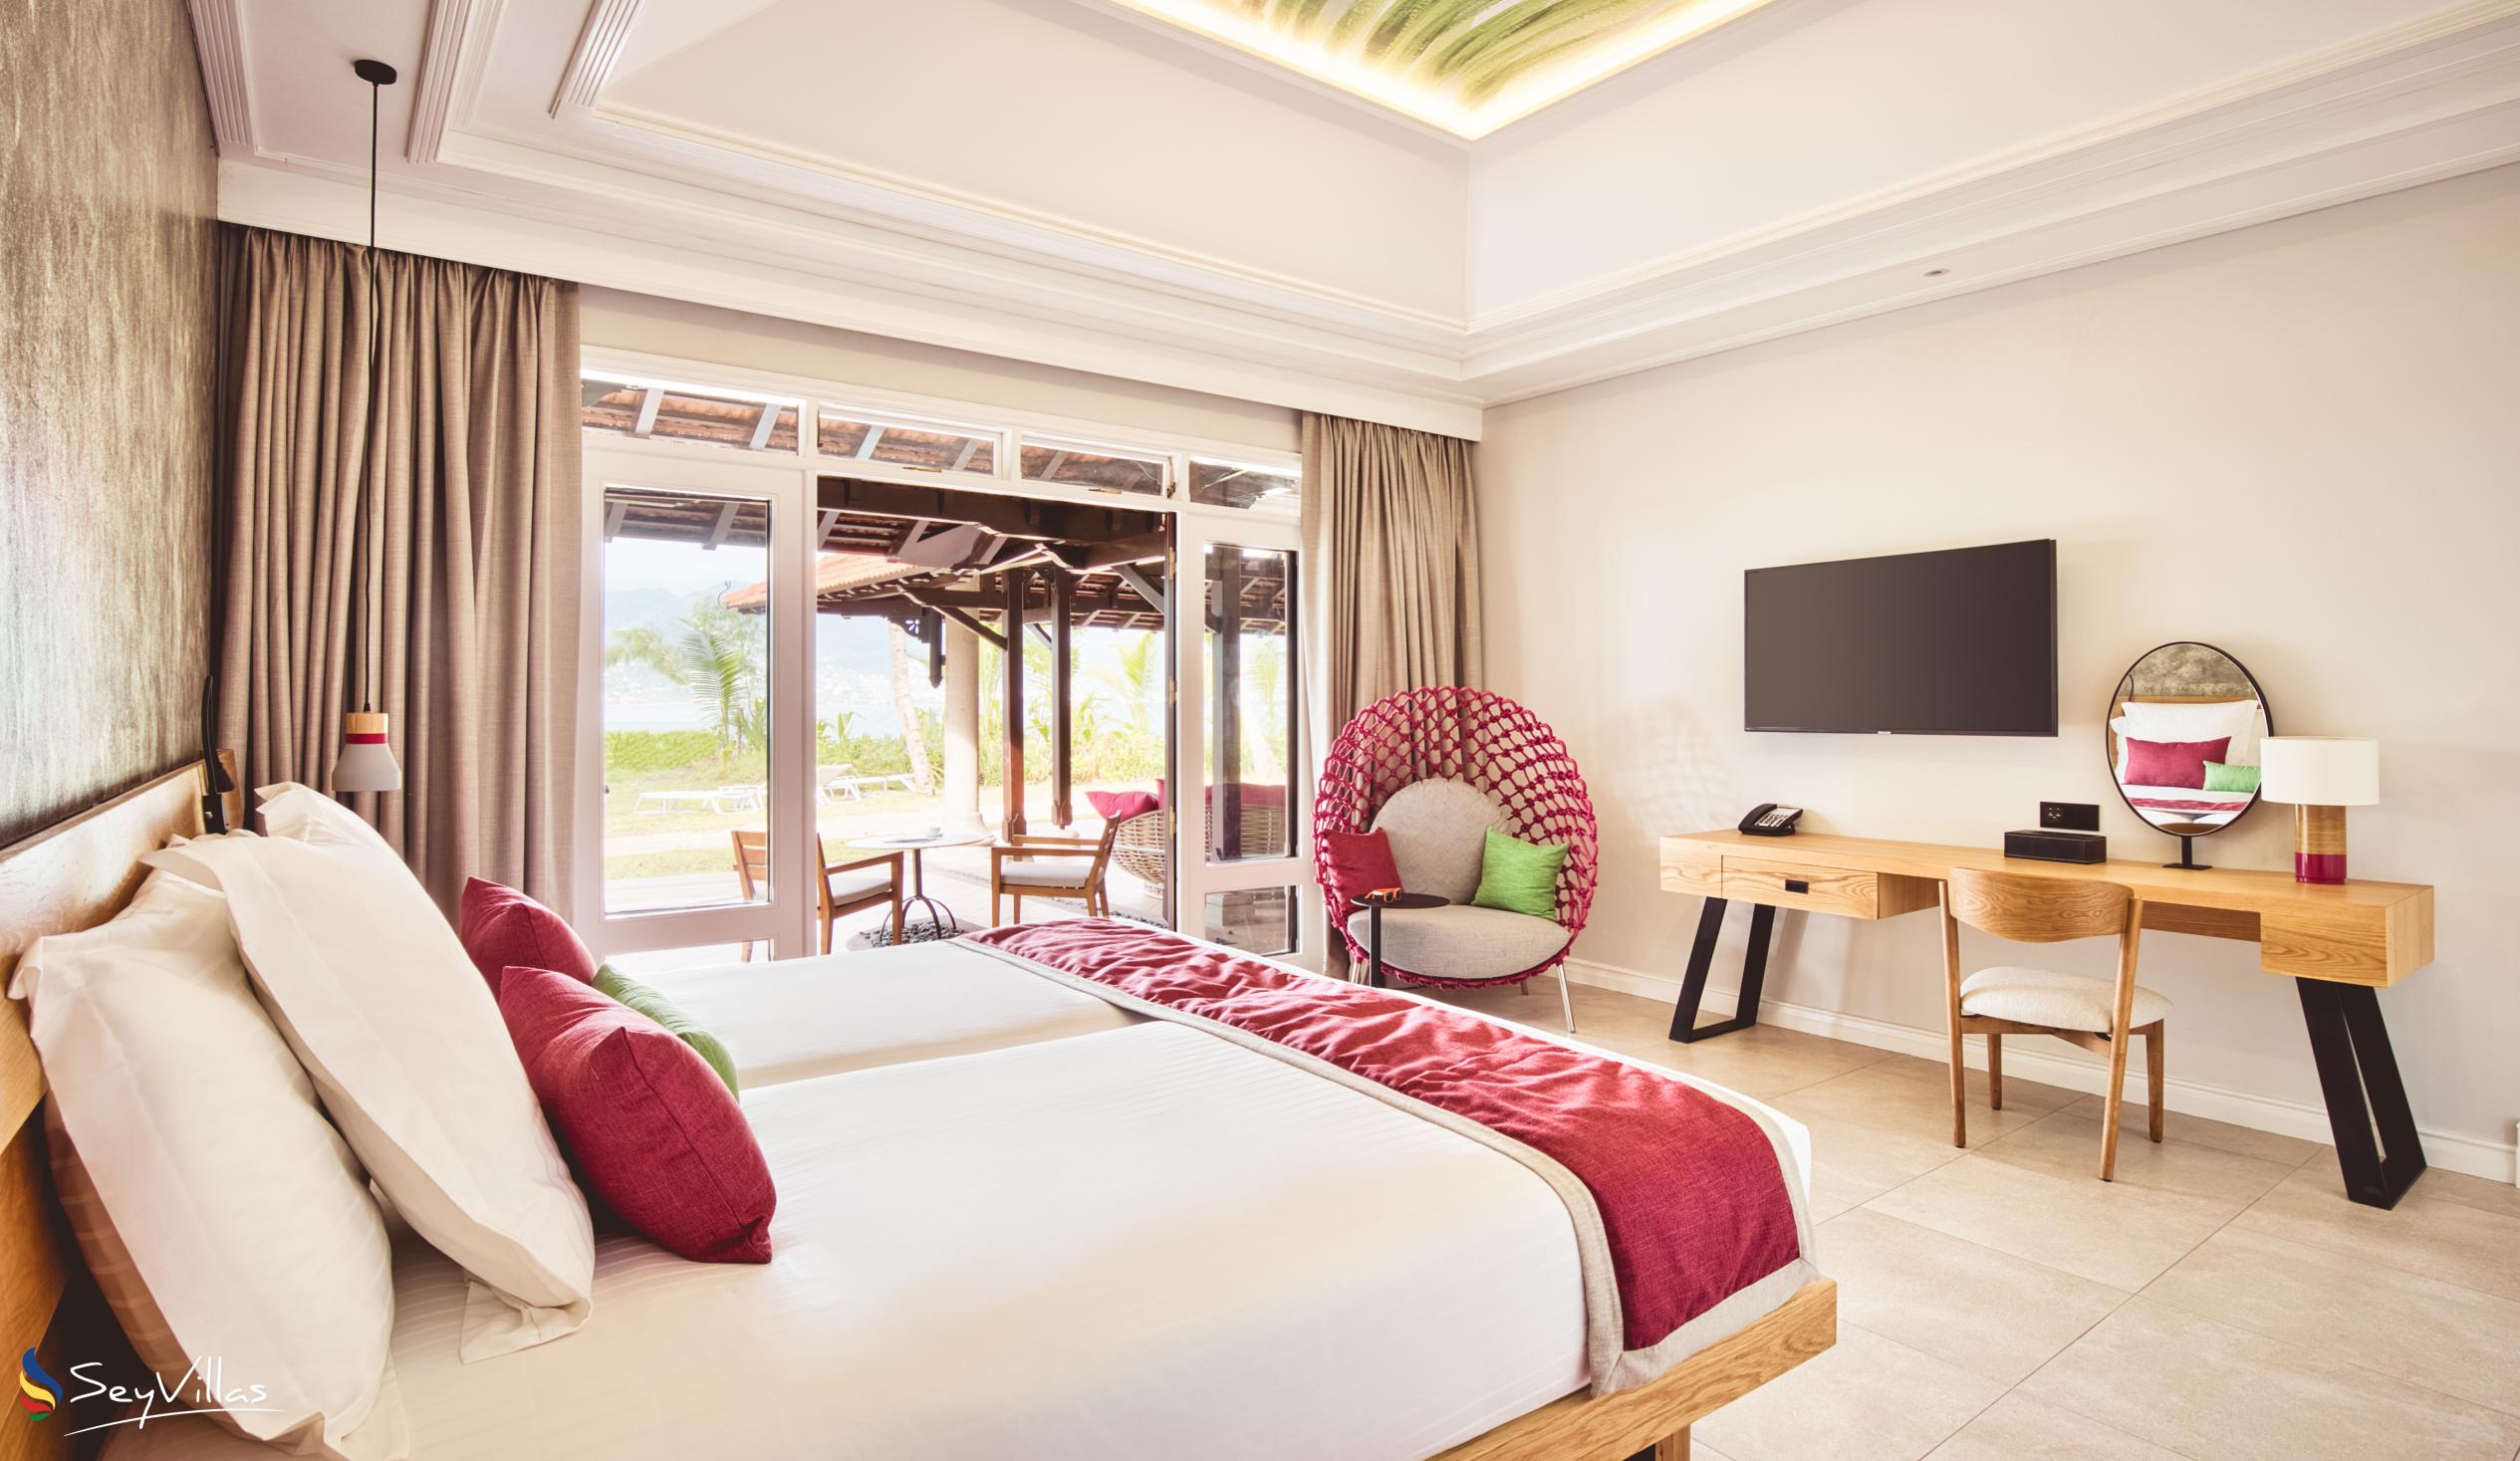 Photo 101: Club Med Seychelles - Family Suite with Private Pool - Saint Anne (Seychelles)